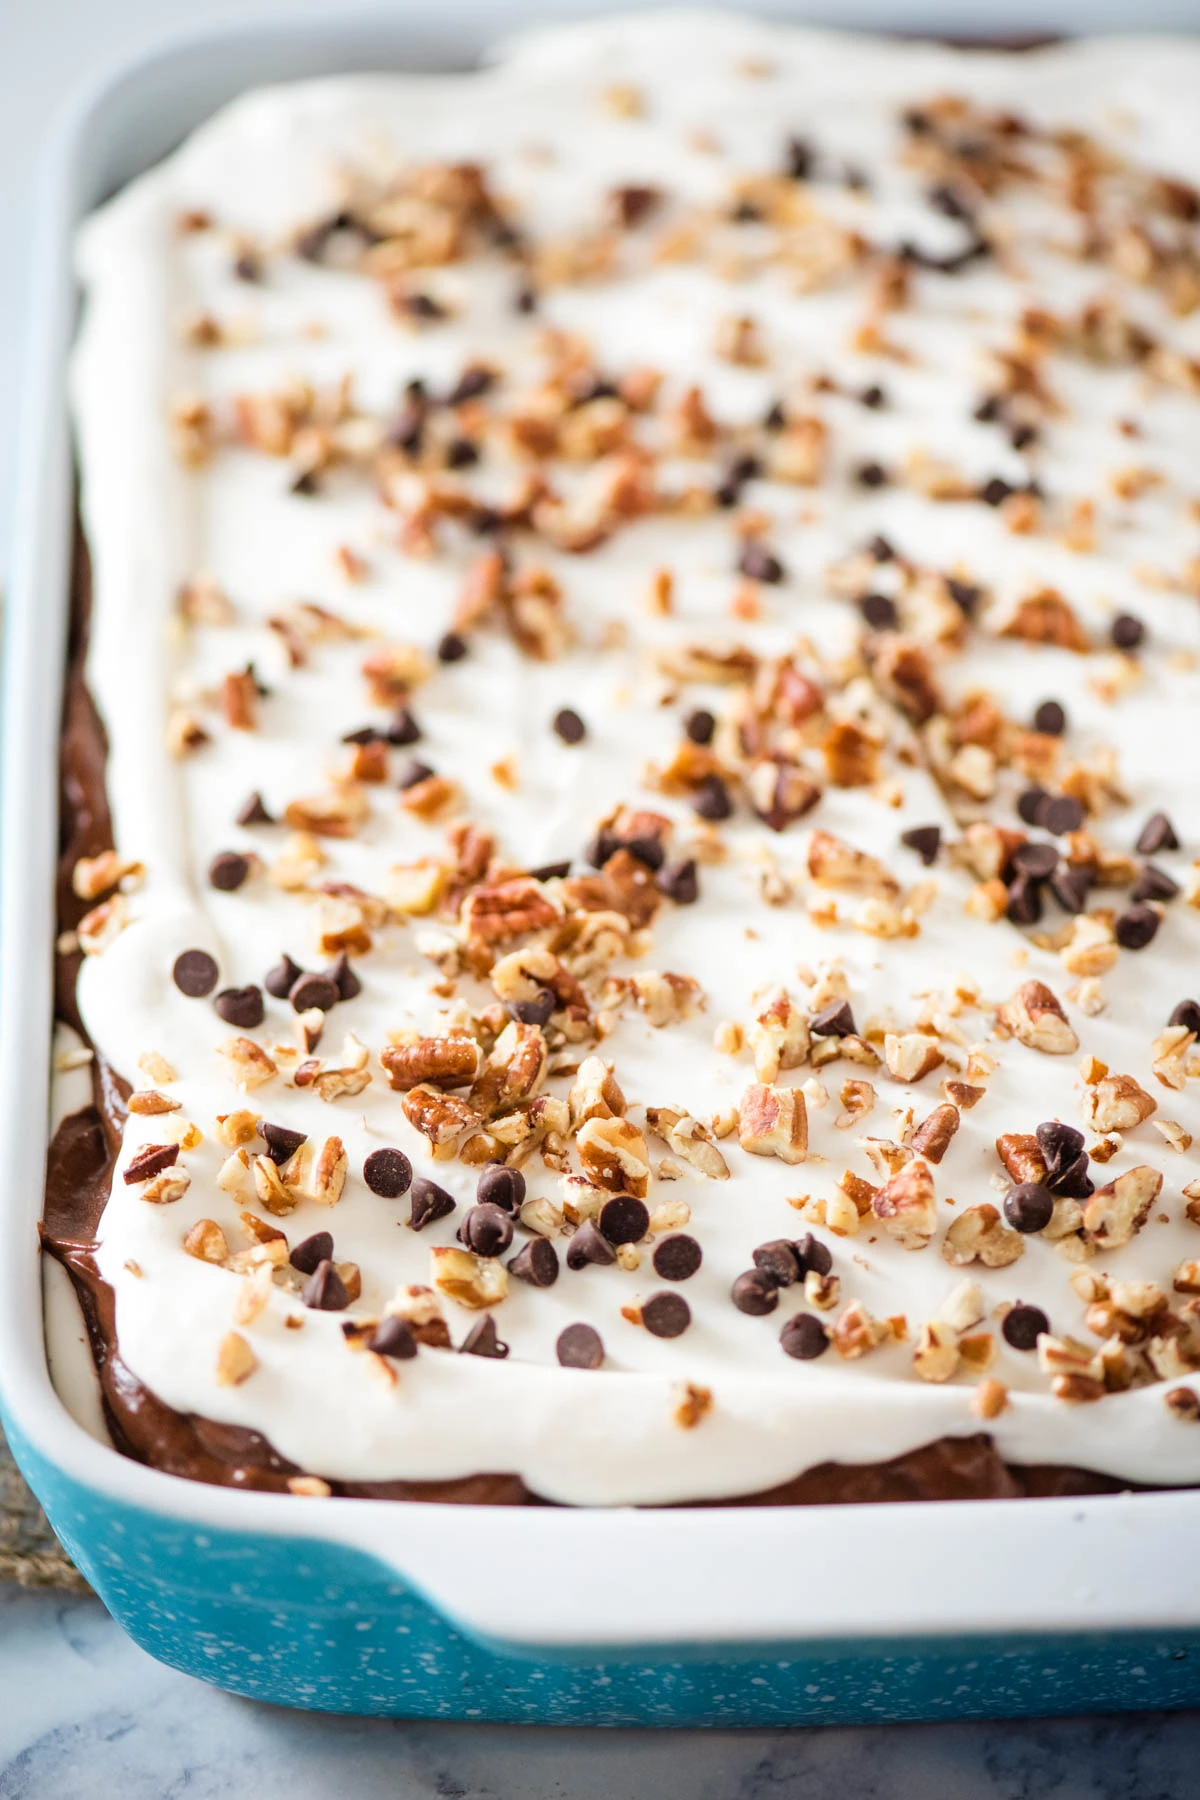 chocolate delight topped off with mini chocolate chips and chopped pecans in a large blue and white baking dish